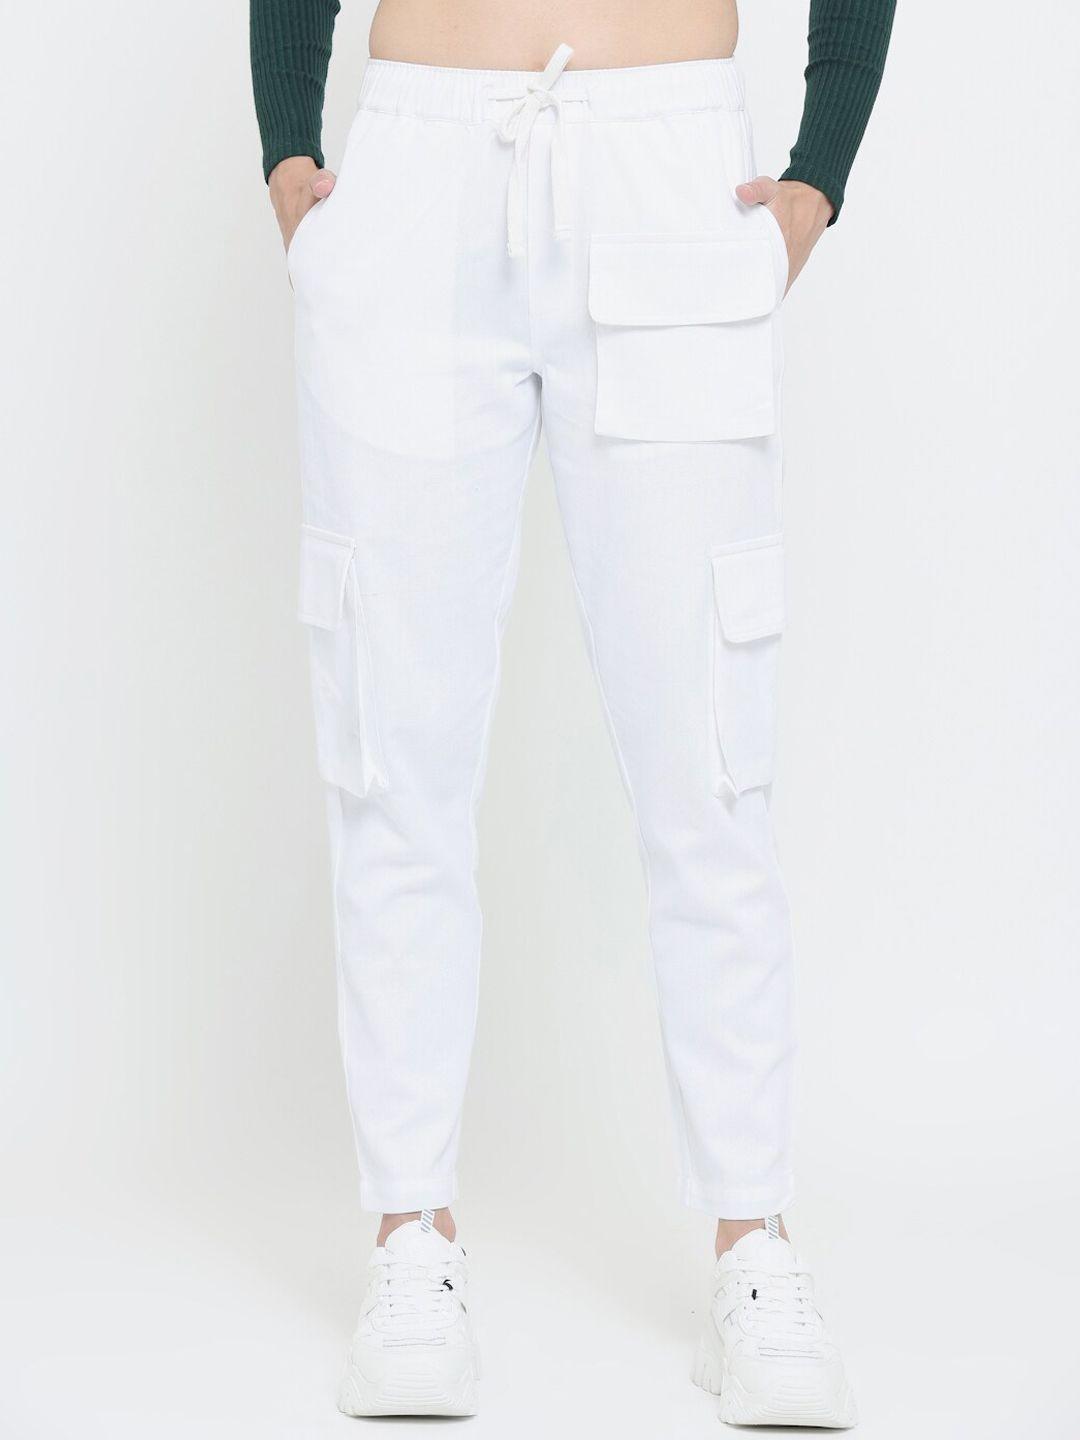 everdion-women-white-relaxed-straight-leg-straight-fit-cargos-trousers